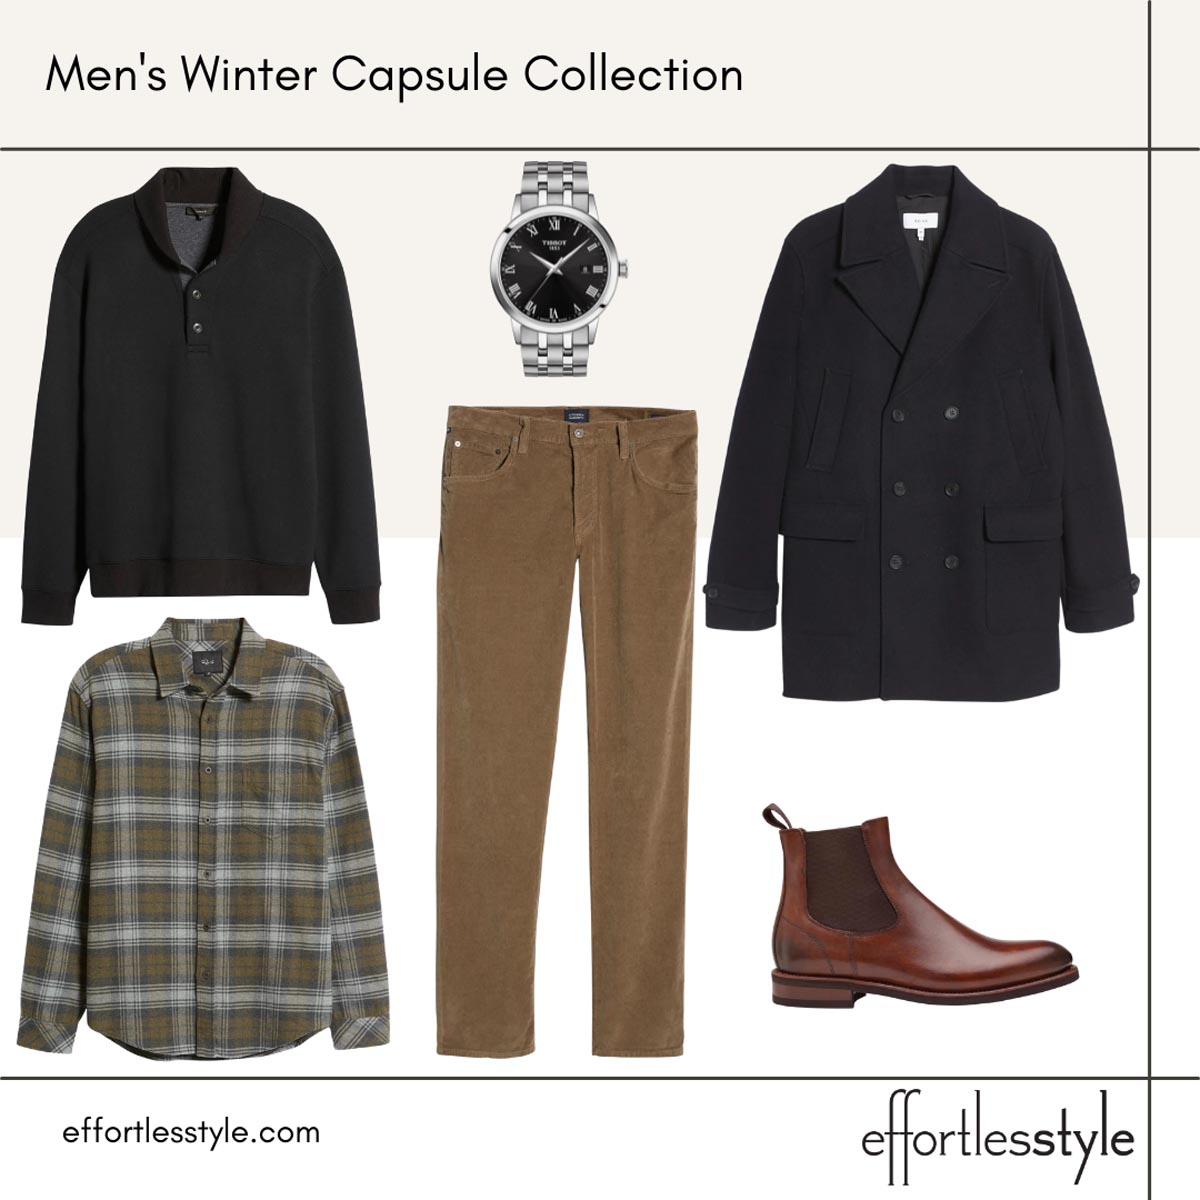 Men's Winter Capsule Collection Styled Looks shawl collar sweater how to wear a shawl collar sweater for men how to style a shawl collar sweater for guys how to wear a sweater with cords sweater and corduroy pant outfit for guys Corduroy pants and boots